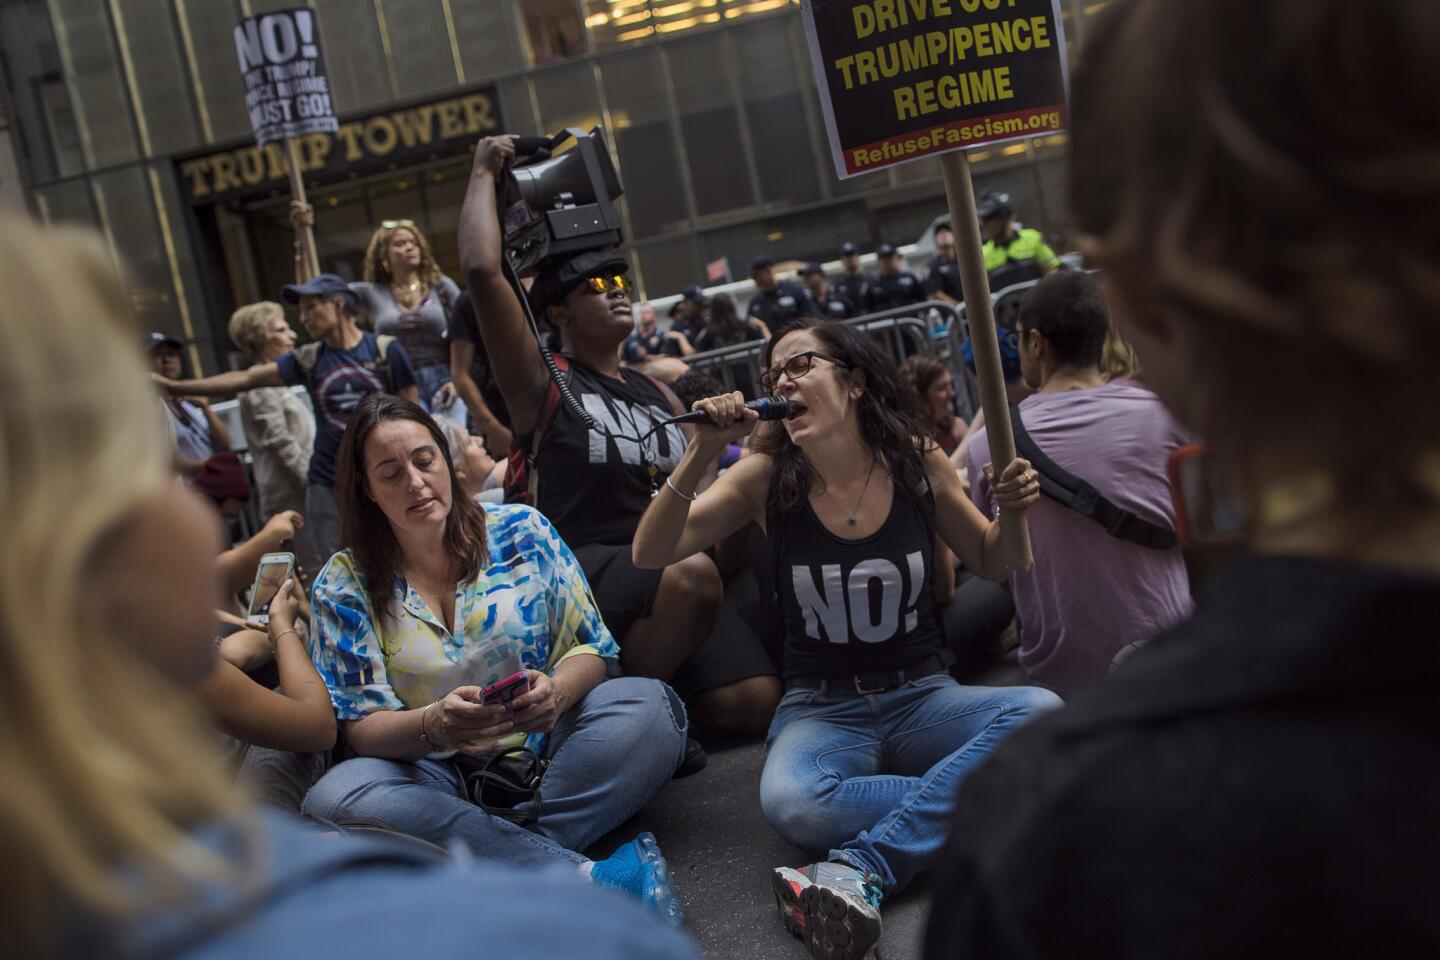 Protesters shout slogans and hold signs criticizing President Donald Trump in front of Trump Tower in New York on Aug. 14, 2017, ahead of his first visit to the building since taking office.